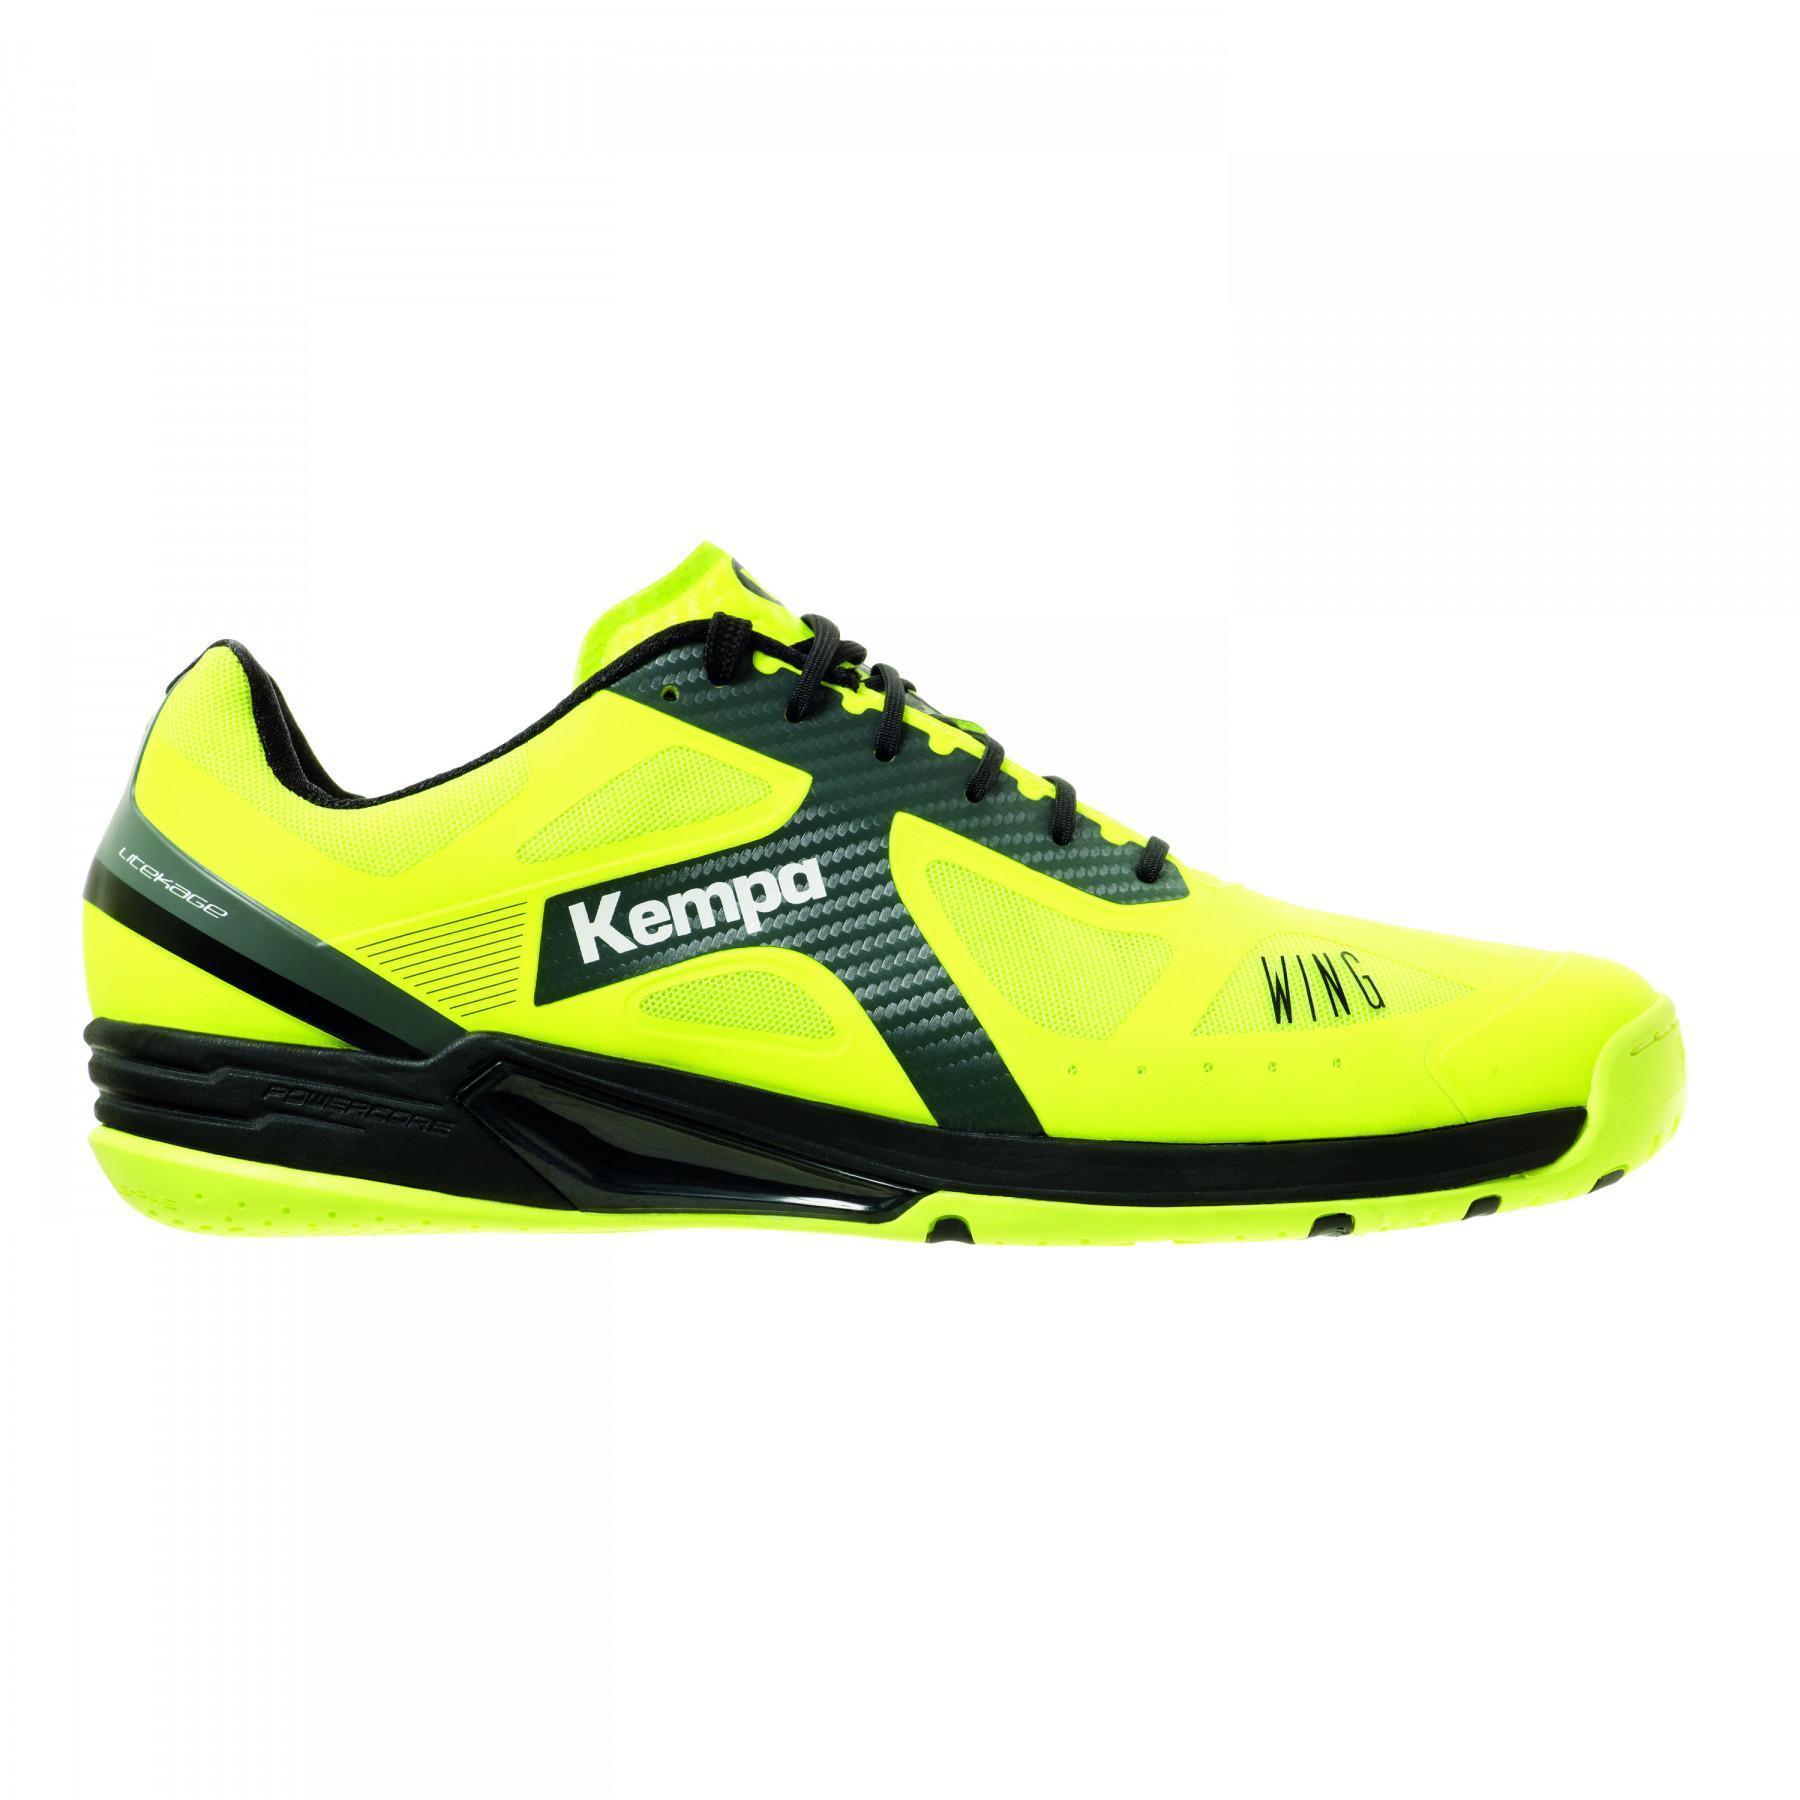 Chaussures Kempa Wing Lite Caution